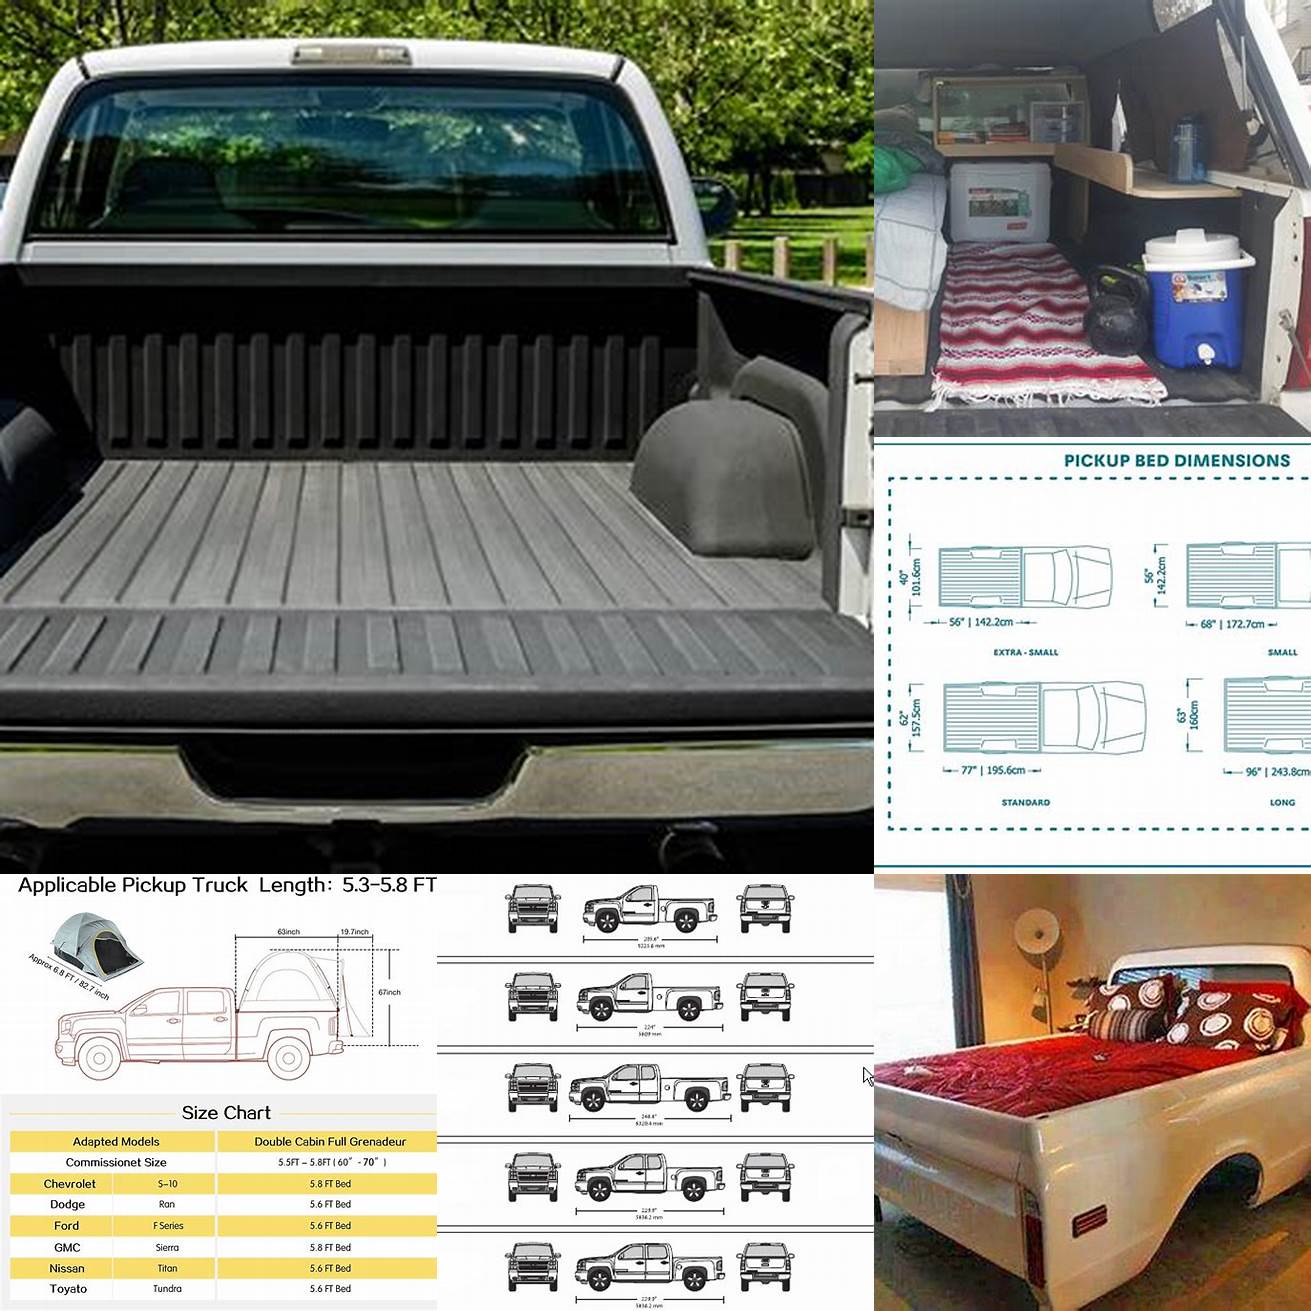 Consider the size and shape of your truck bed